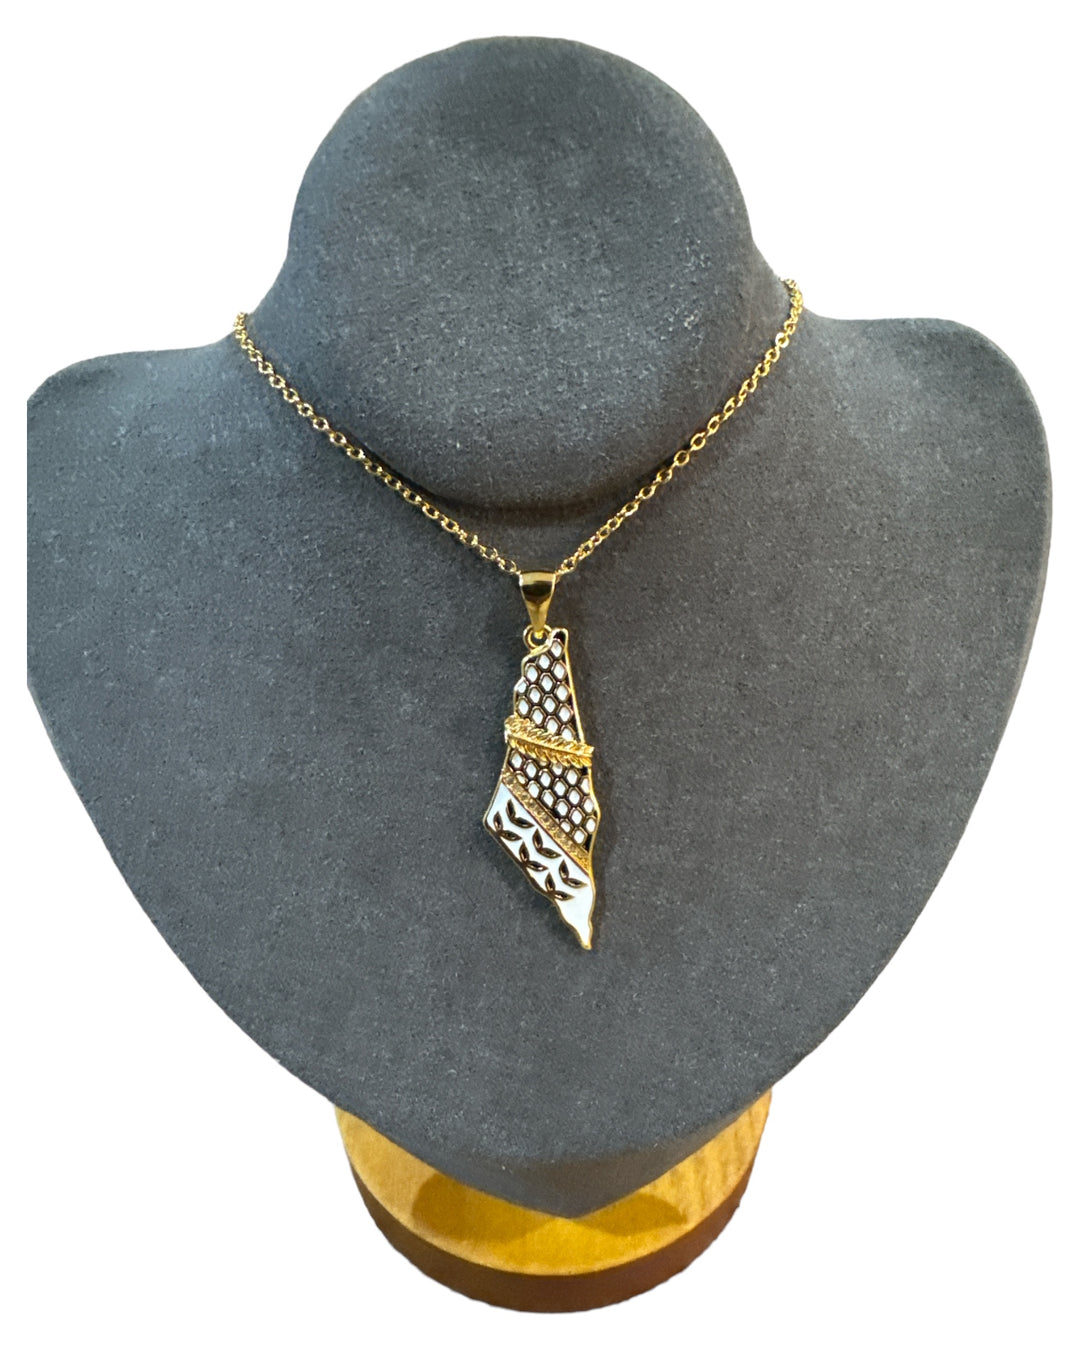 Golden Palestine Map Necklace: A Symbol of Heritage with Keffiyeh Elegance